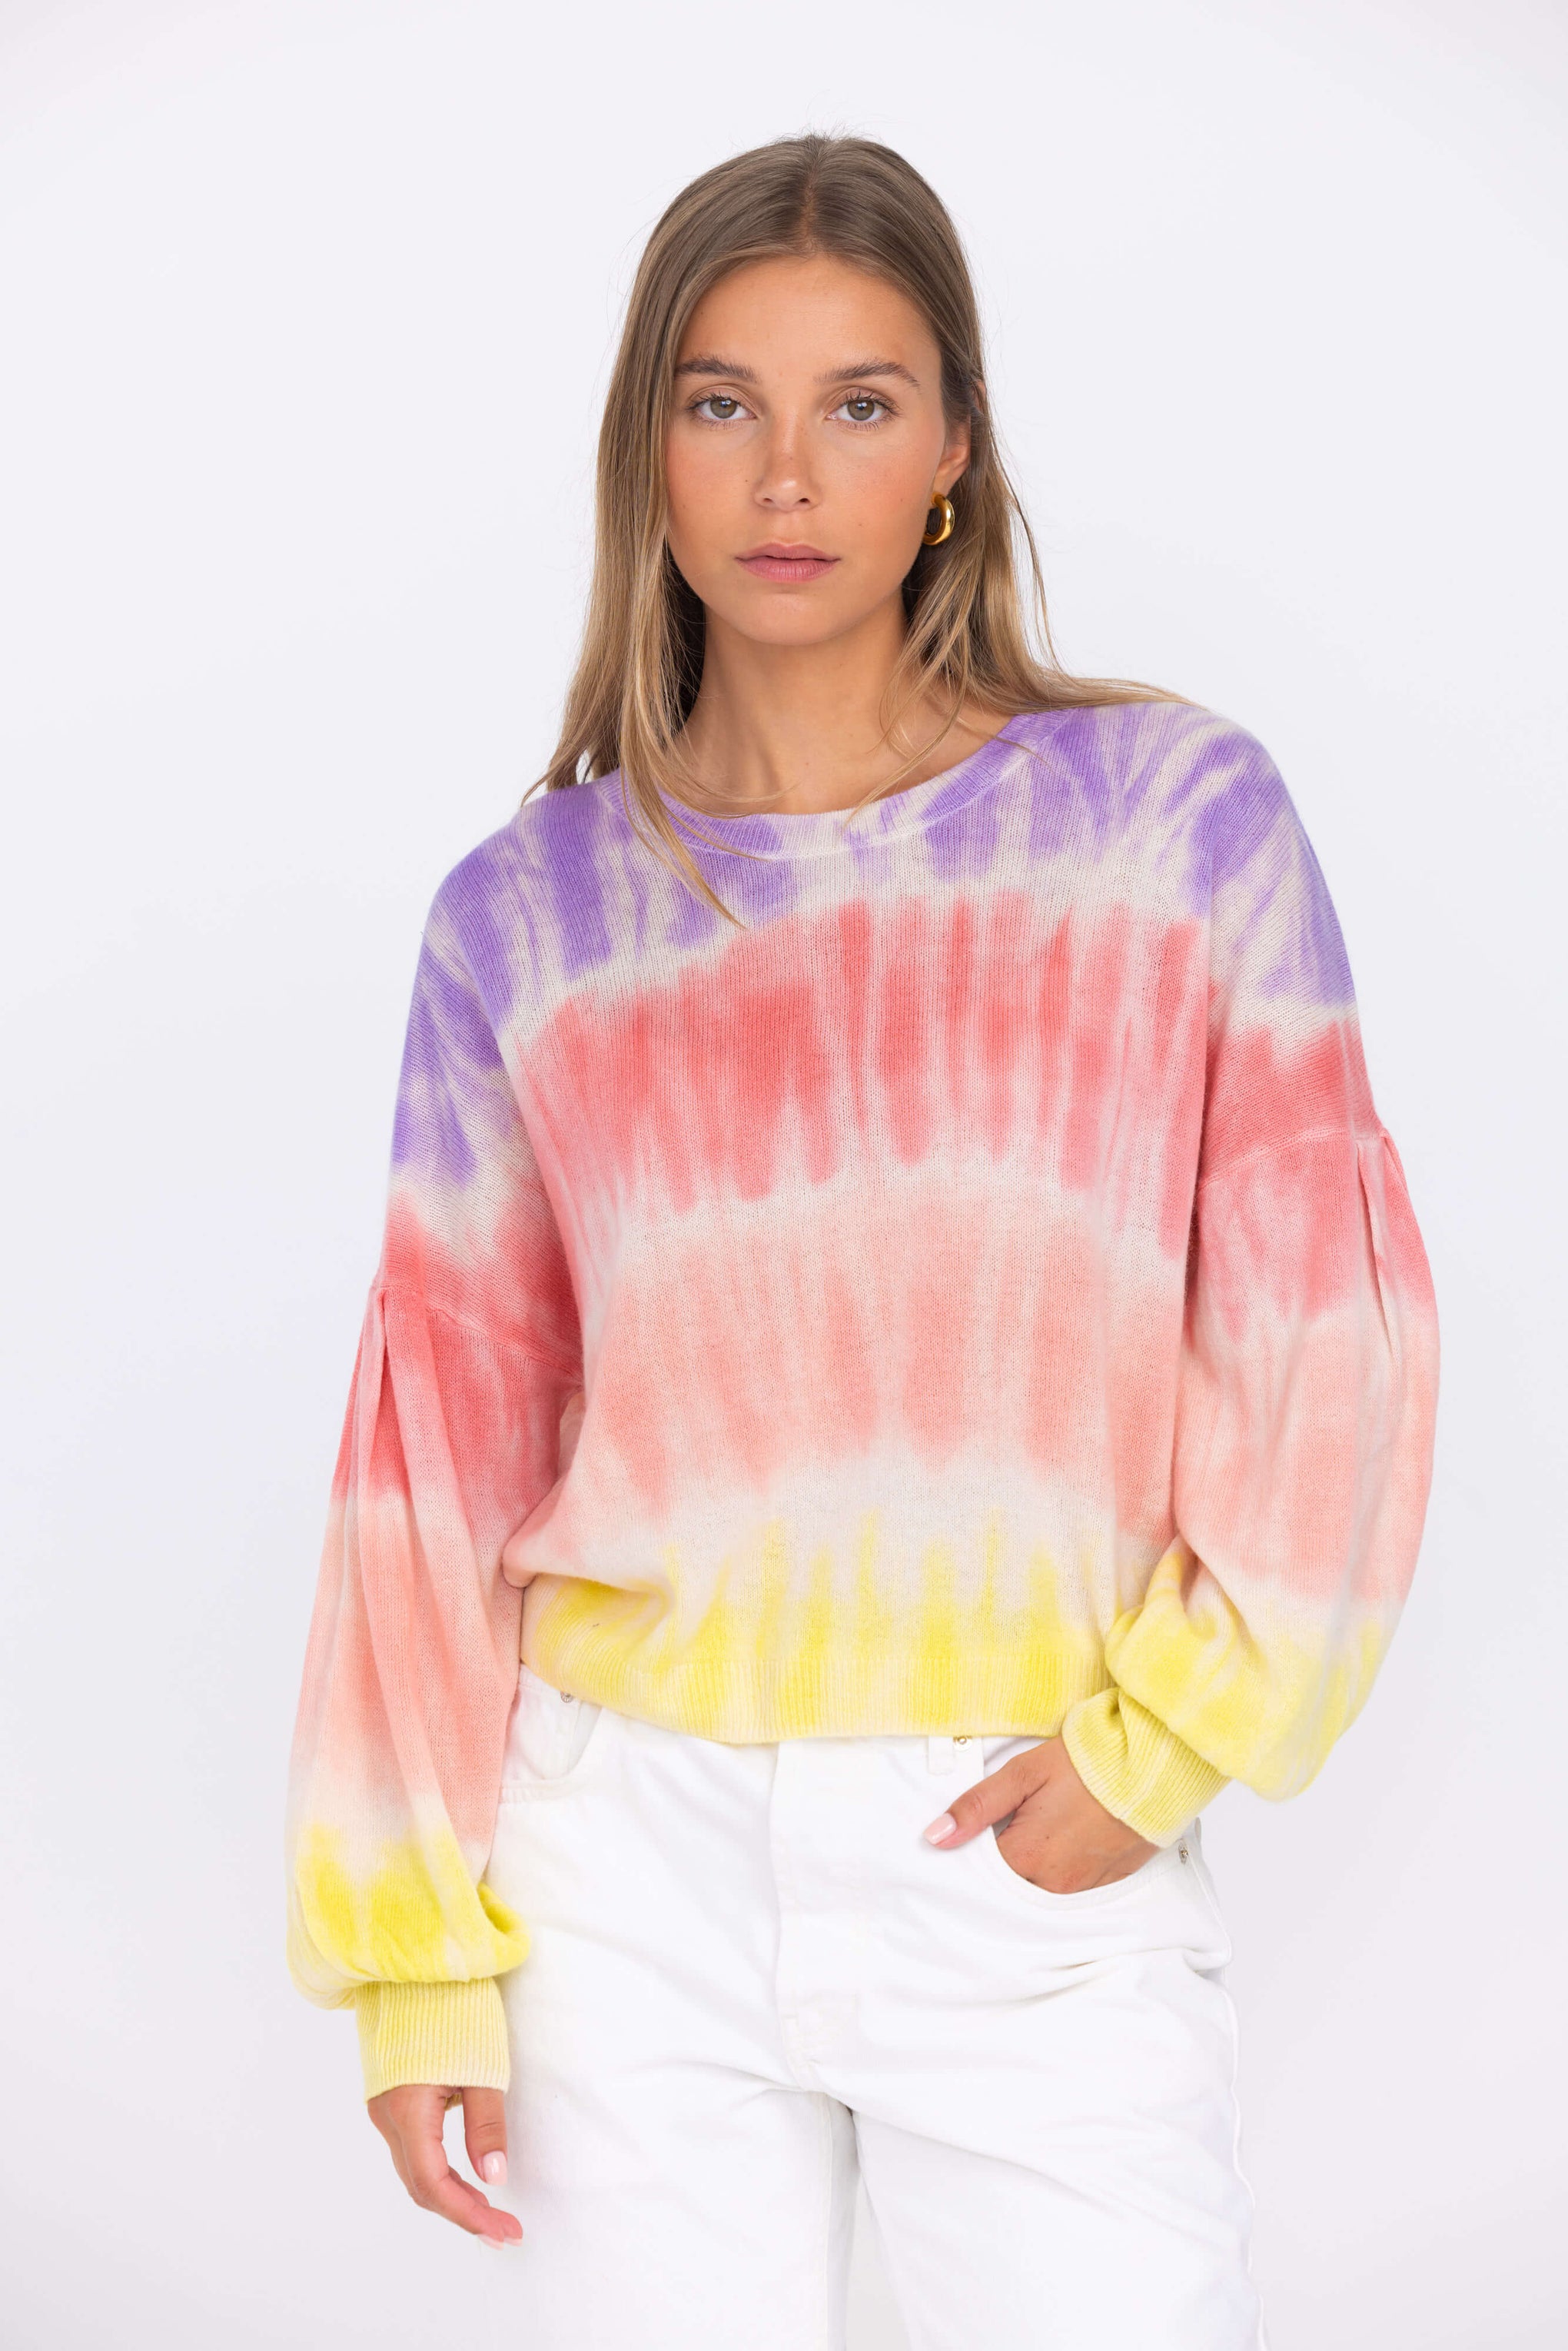 Crush Cashmere Tie Dye Harley Batwing Crew in Sherbert available at The New Trend